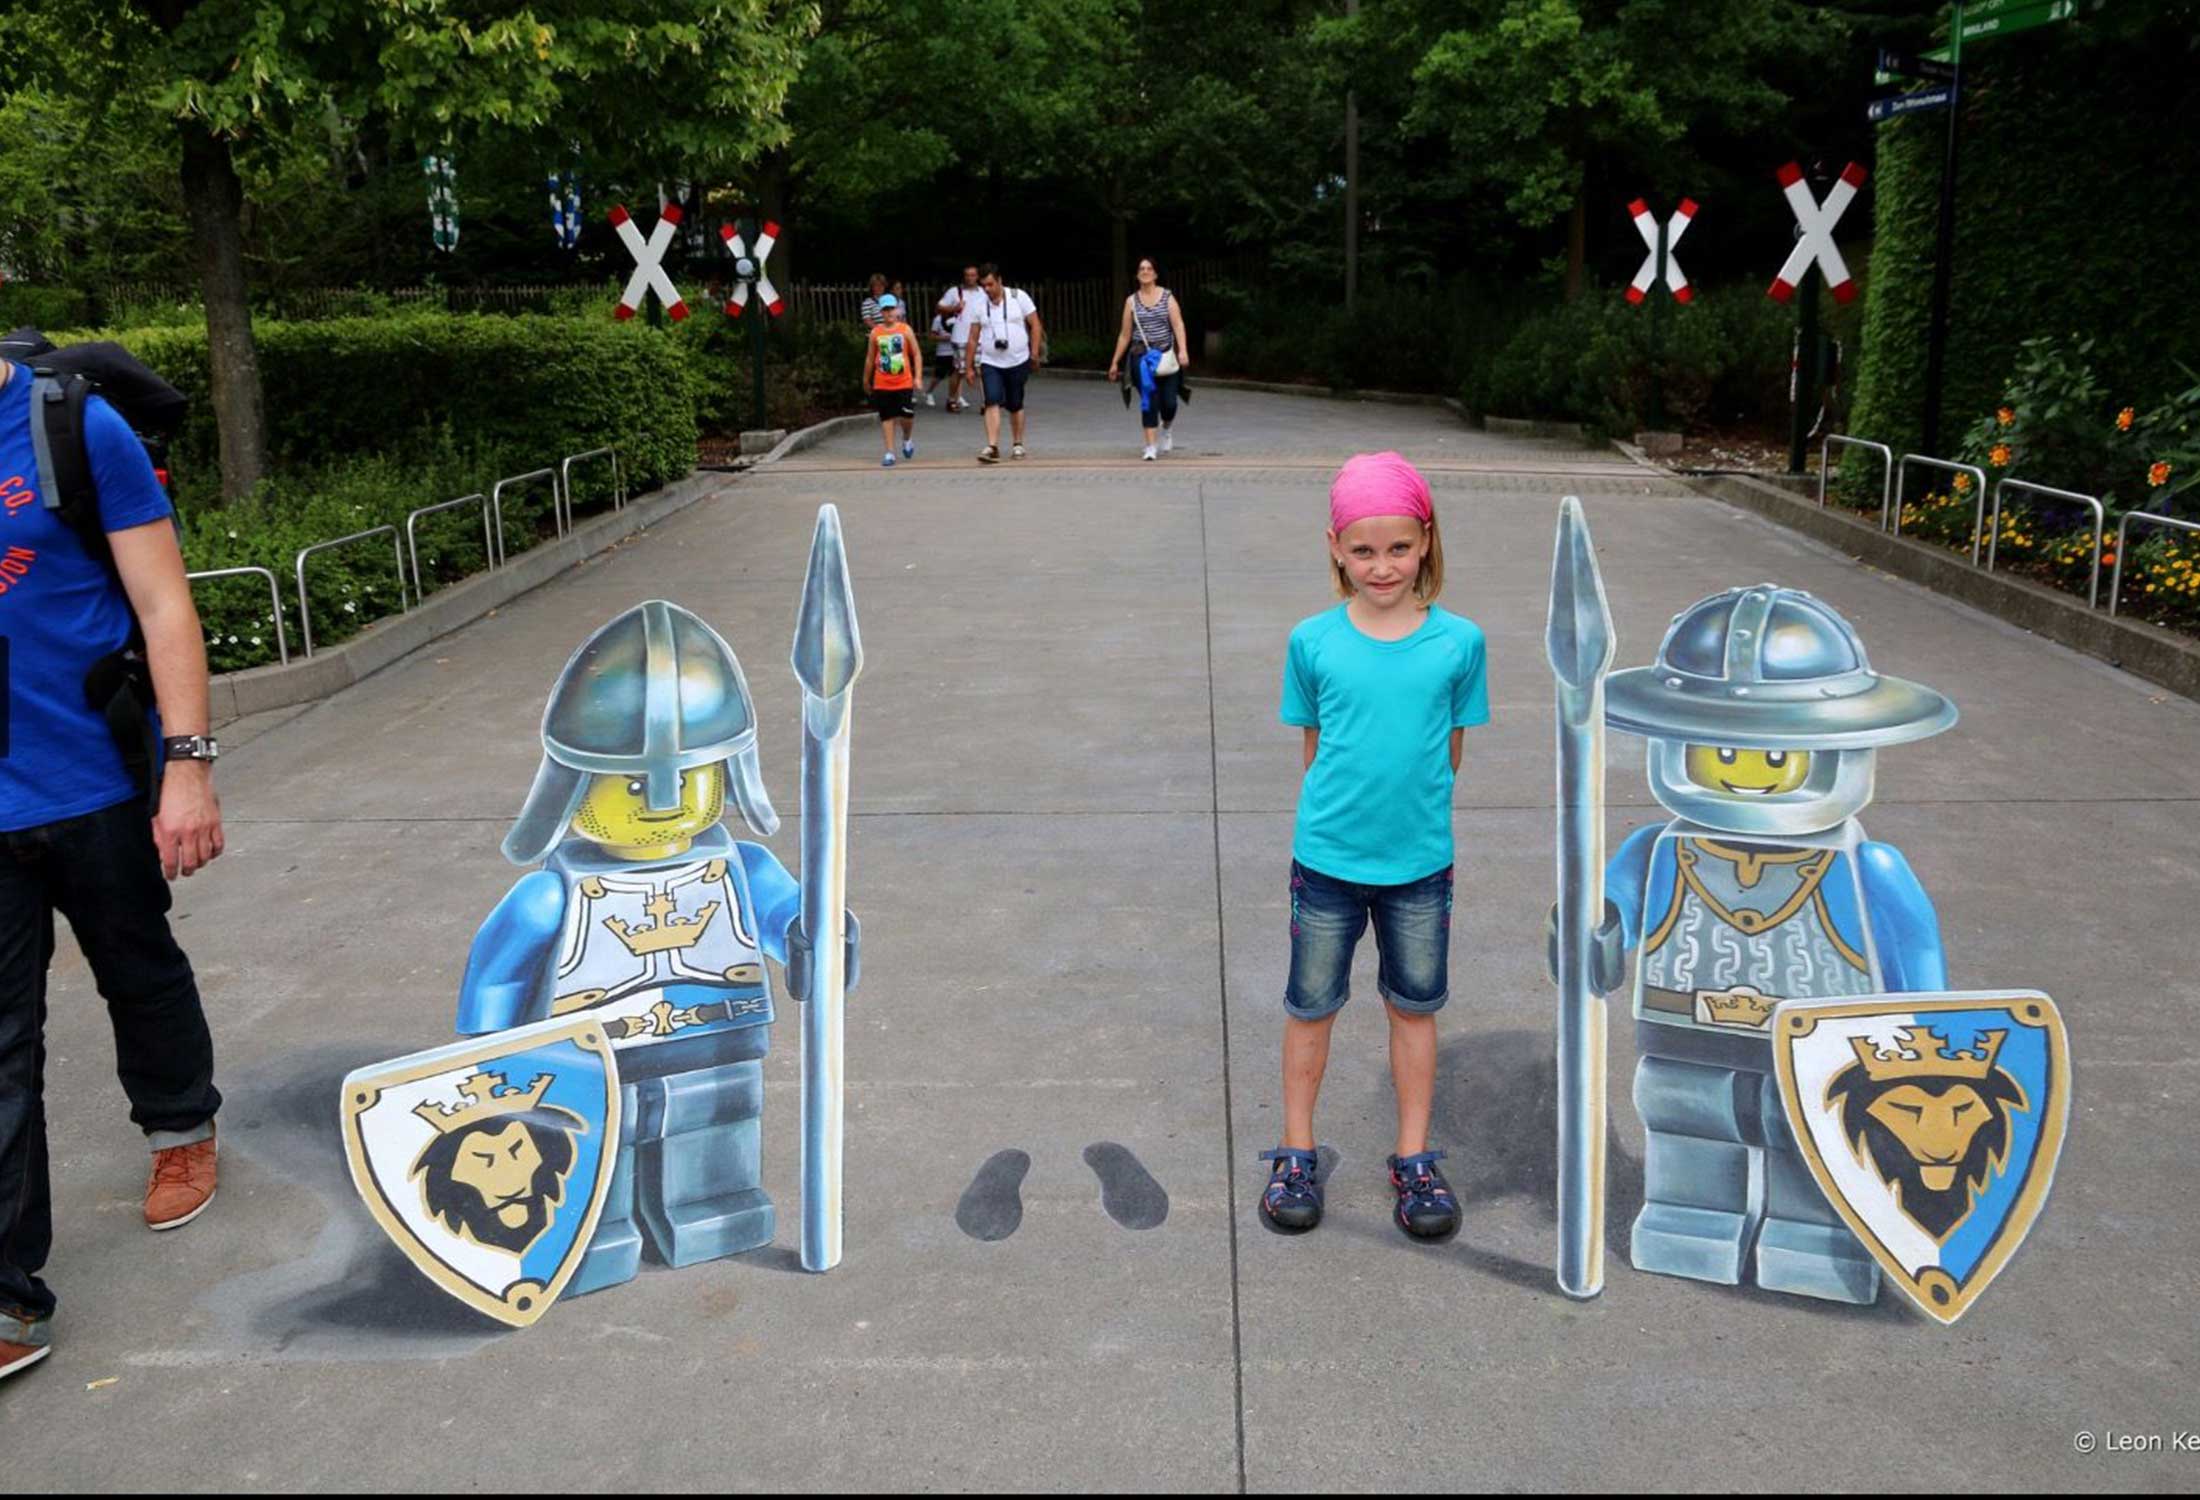 Enchanting 3D art in public places by Leon Keer featuring Lego characters